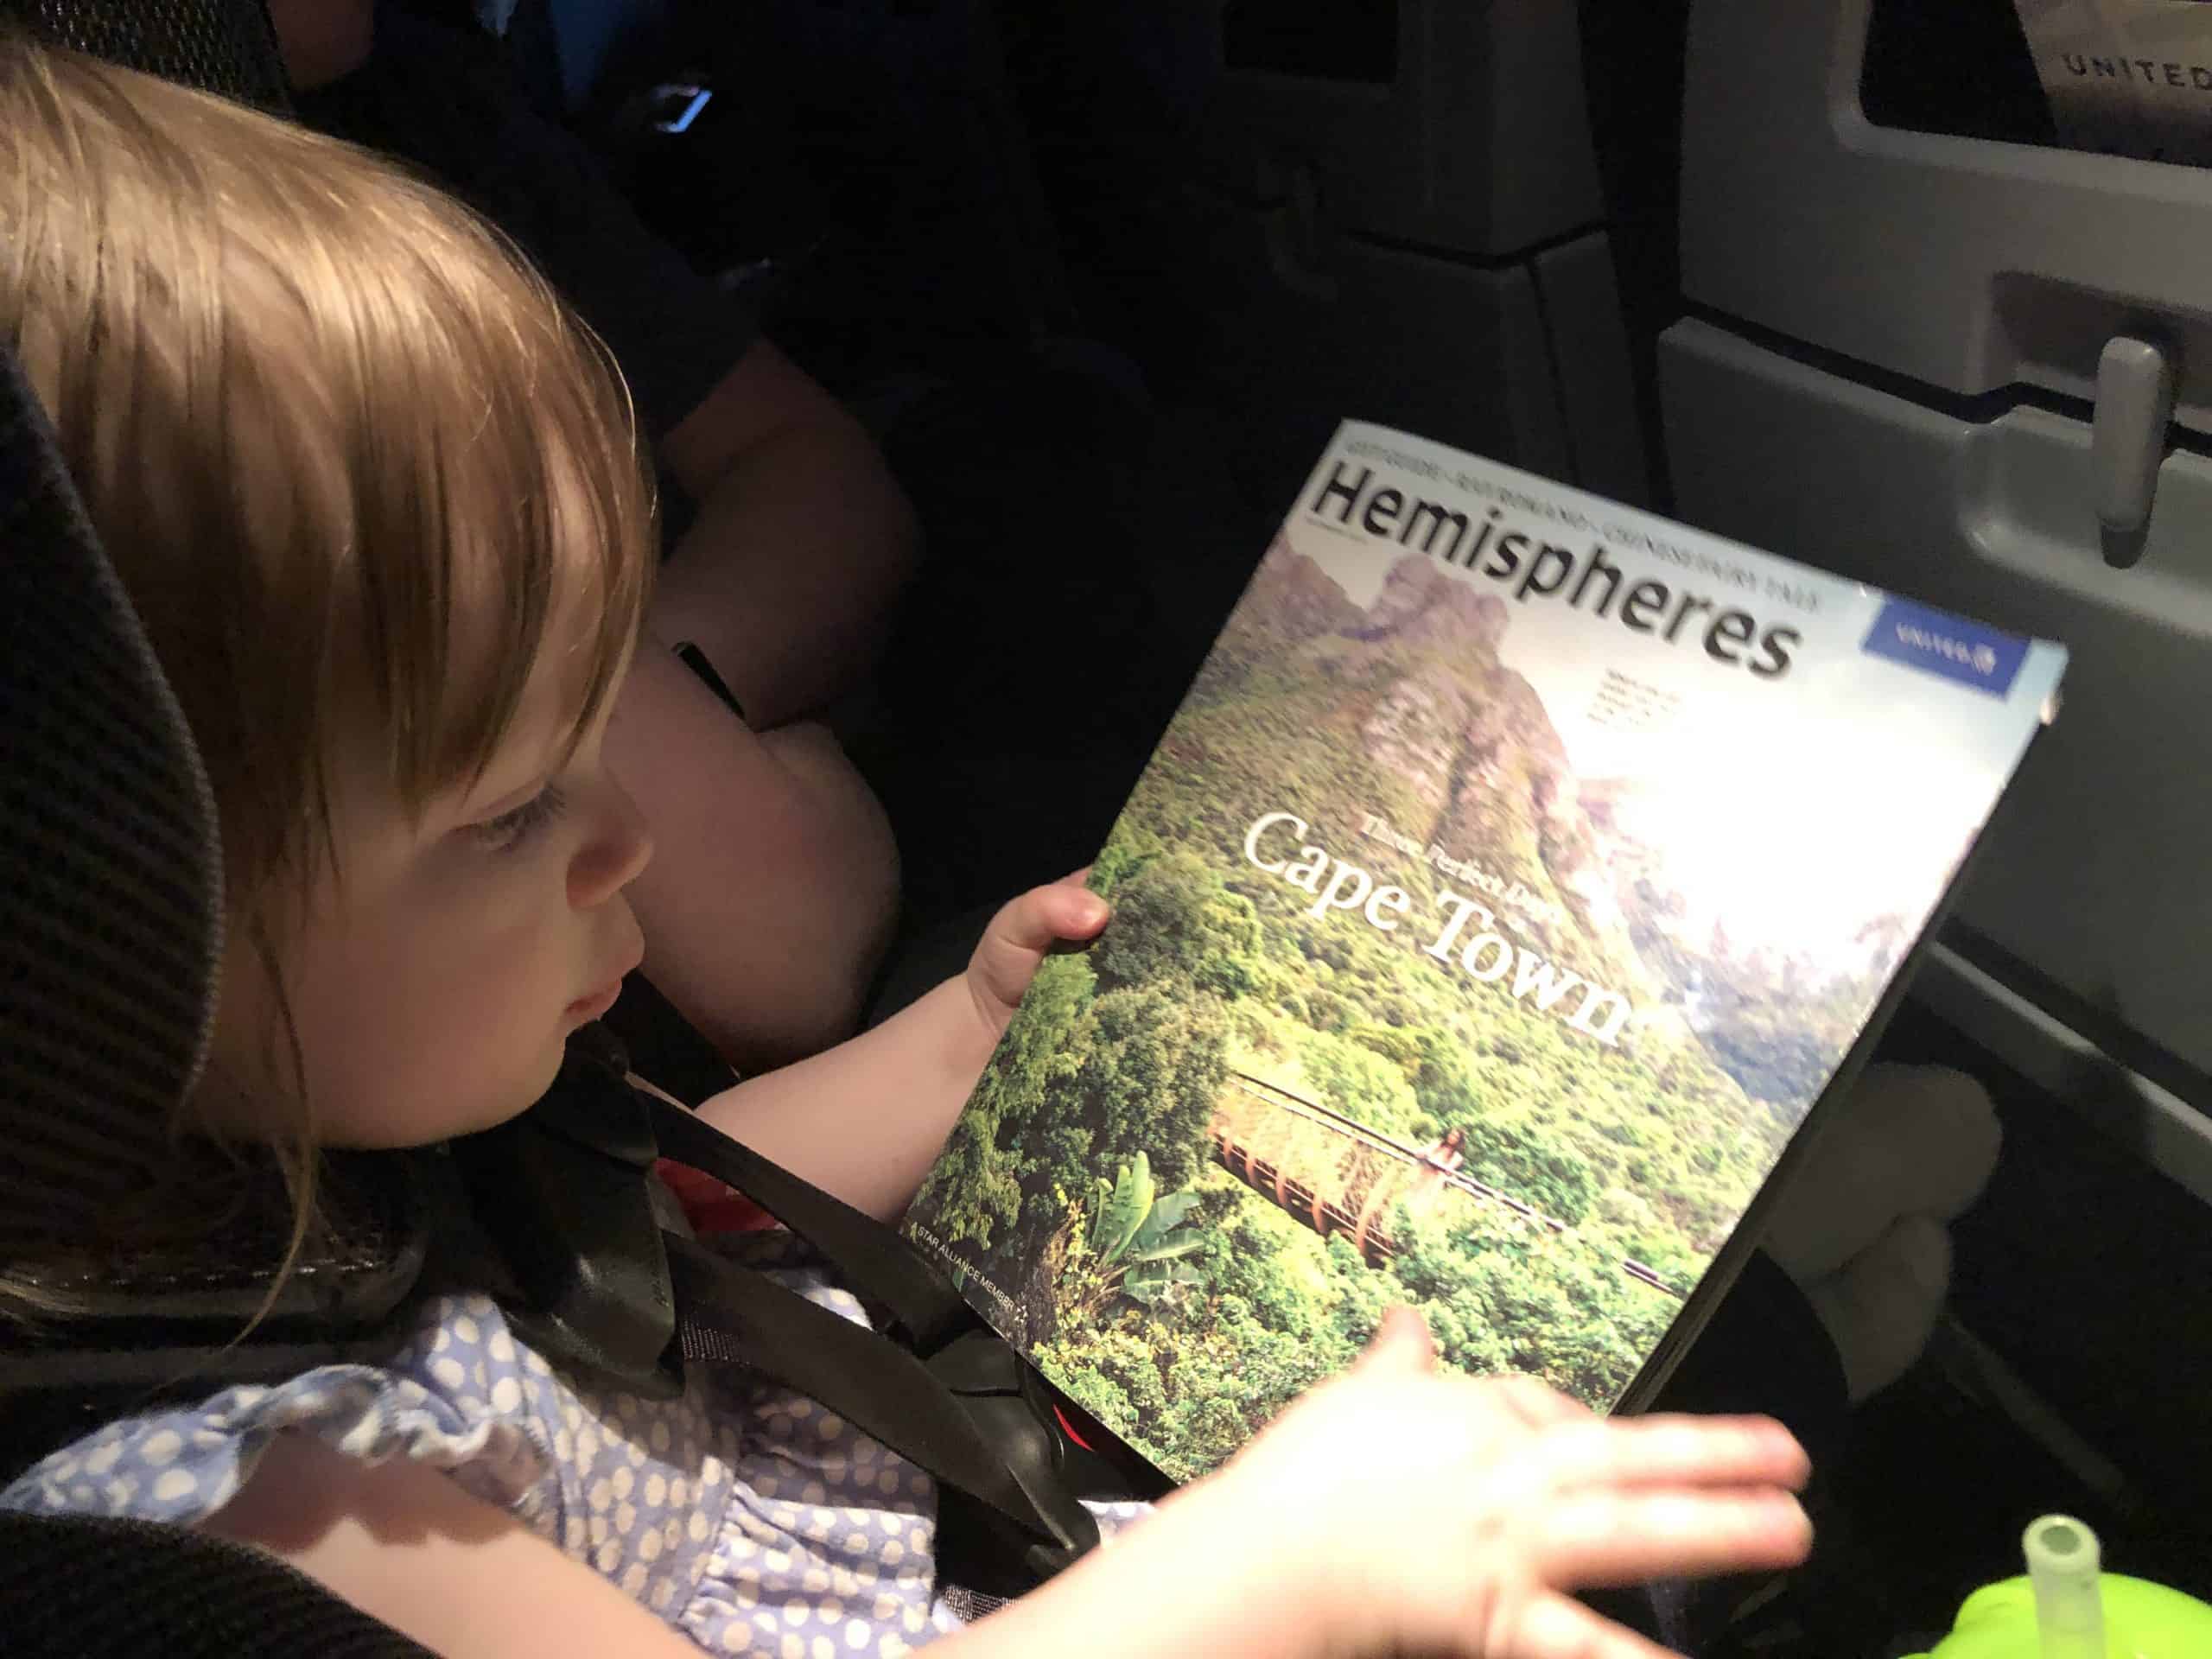 Leah catching up on reading in the airplane